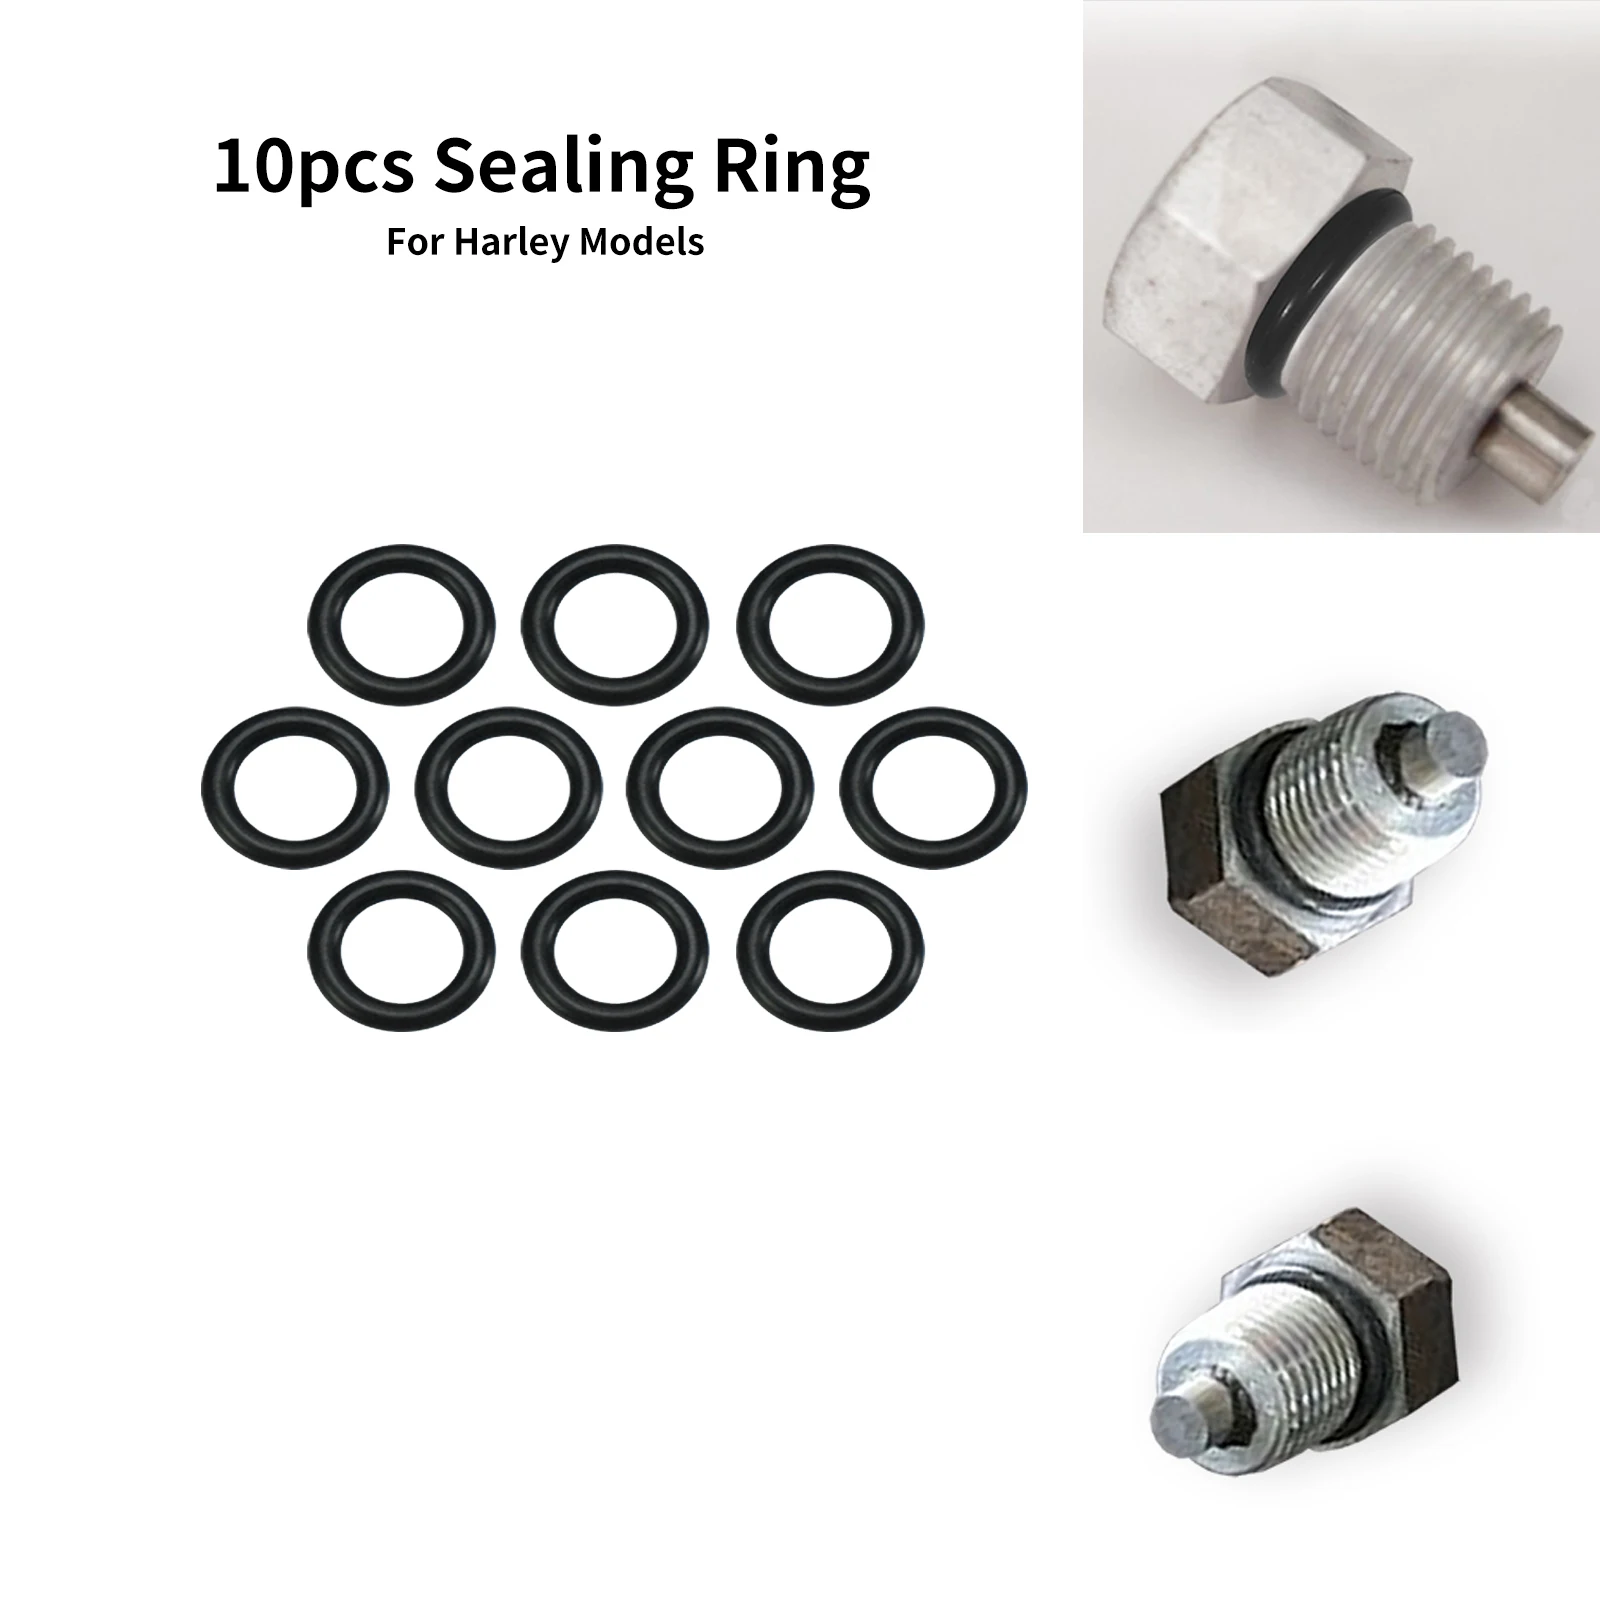 Motorcycle 10pcs Rubber Sealing Ring 11105 Engine Transmission Twin Cam Oil Drain Plug For Harley Touring Dyna Softail Sportster